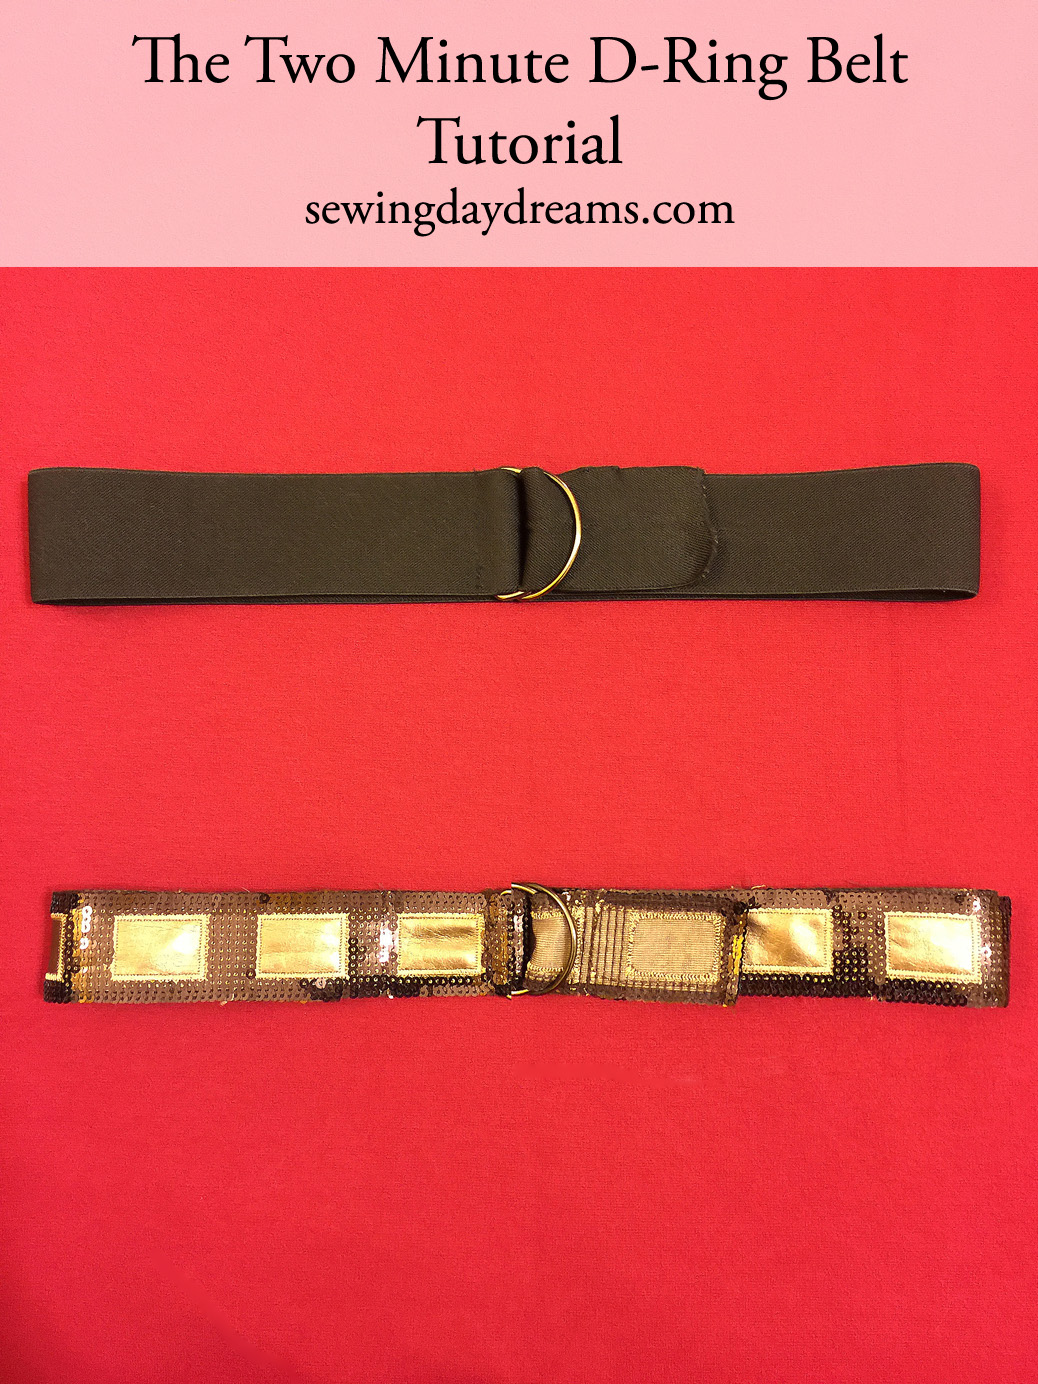 https://www.sewingdaydreams.com/wp-content/uploads/2015/07/sewing-daydreams-two-minute-d-ring-belt-tutorial.jpg